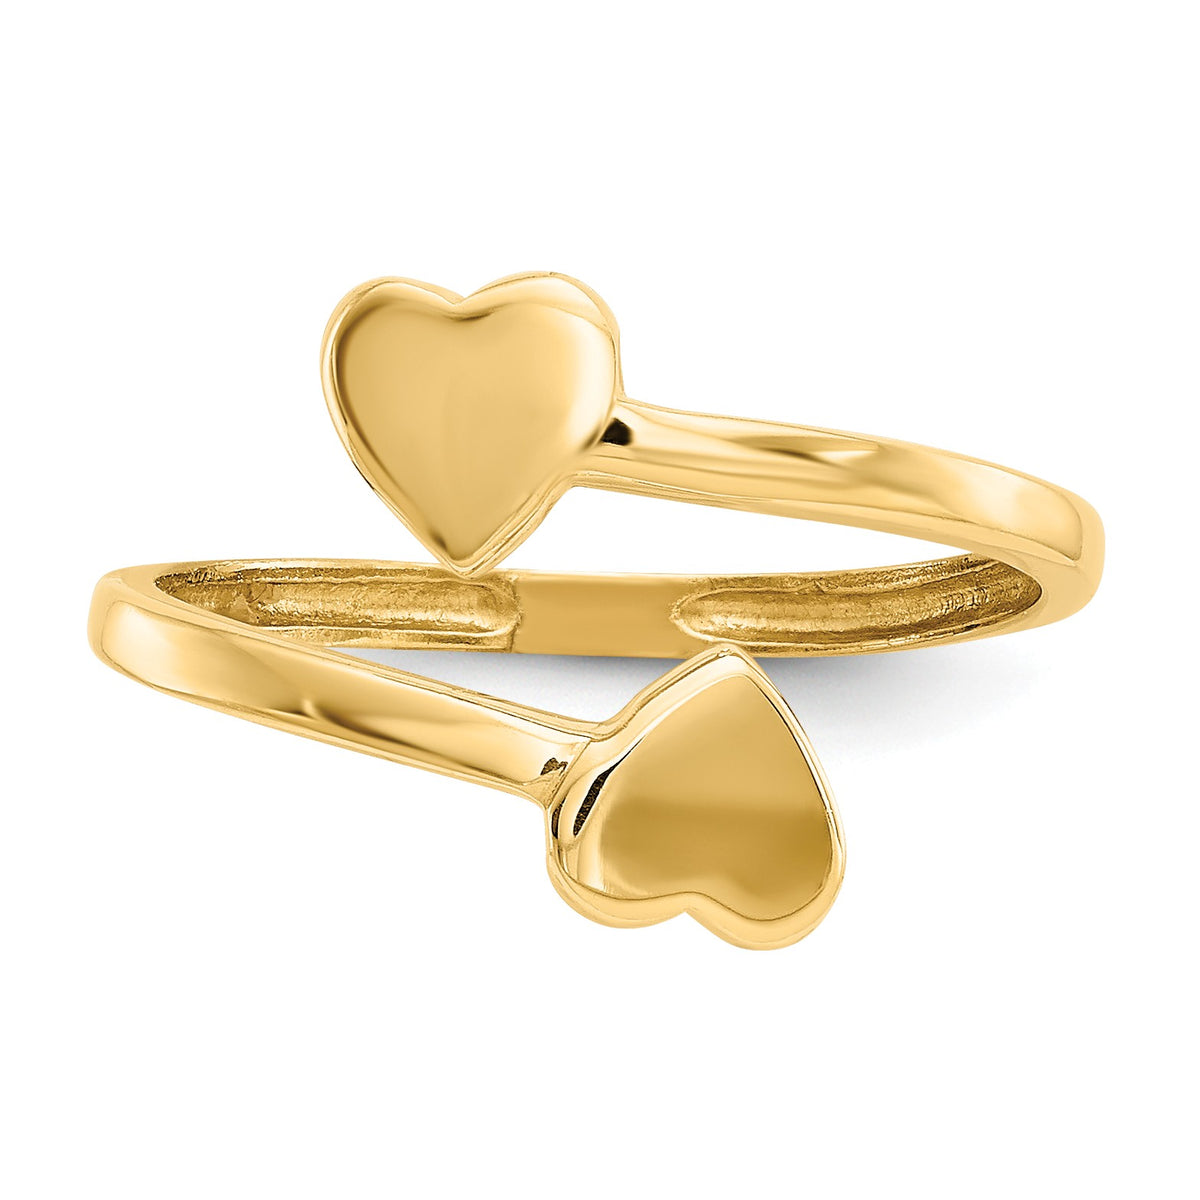 Alternate view of the Twin Heart Adjustable Toe Ring in 14 Karat Gold by The Black Bow Jewelry Co.